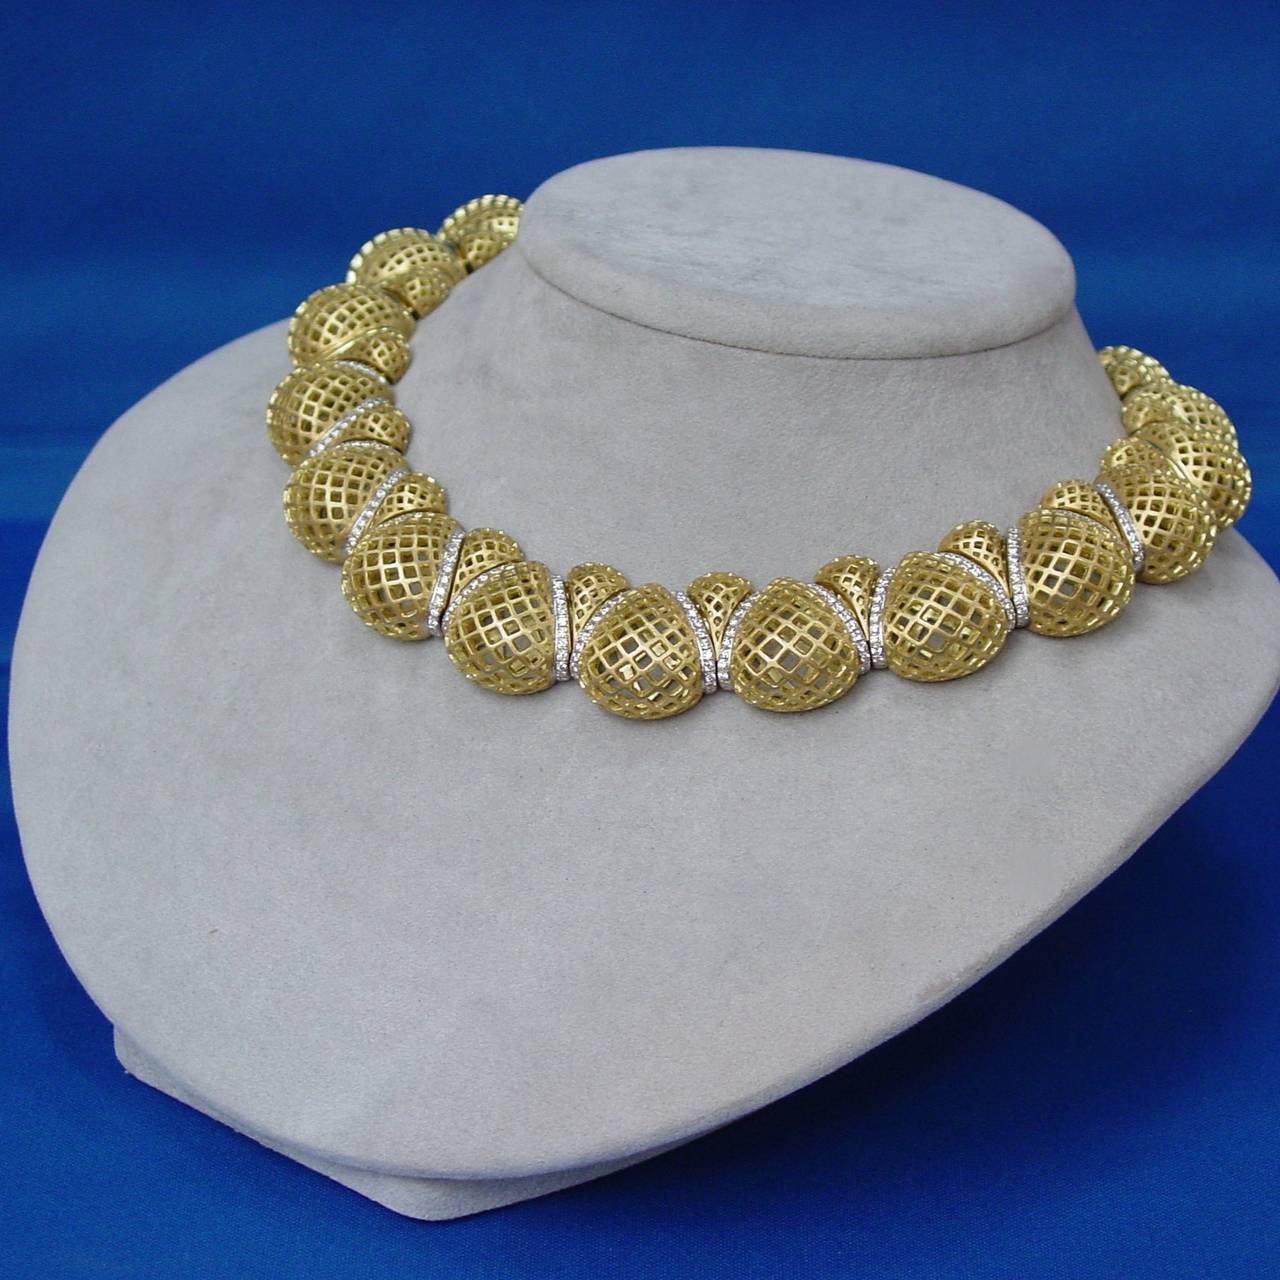 A beautifully made openwork 18 karat yellow gold and diamond necklace, bracelet and  earring suite by Lee Havens. The necklace and earrings are set with approximately 6.80 carats of round diamonds and the bracelet is set with approximately 2.50